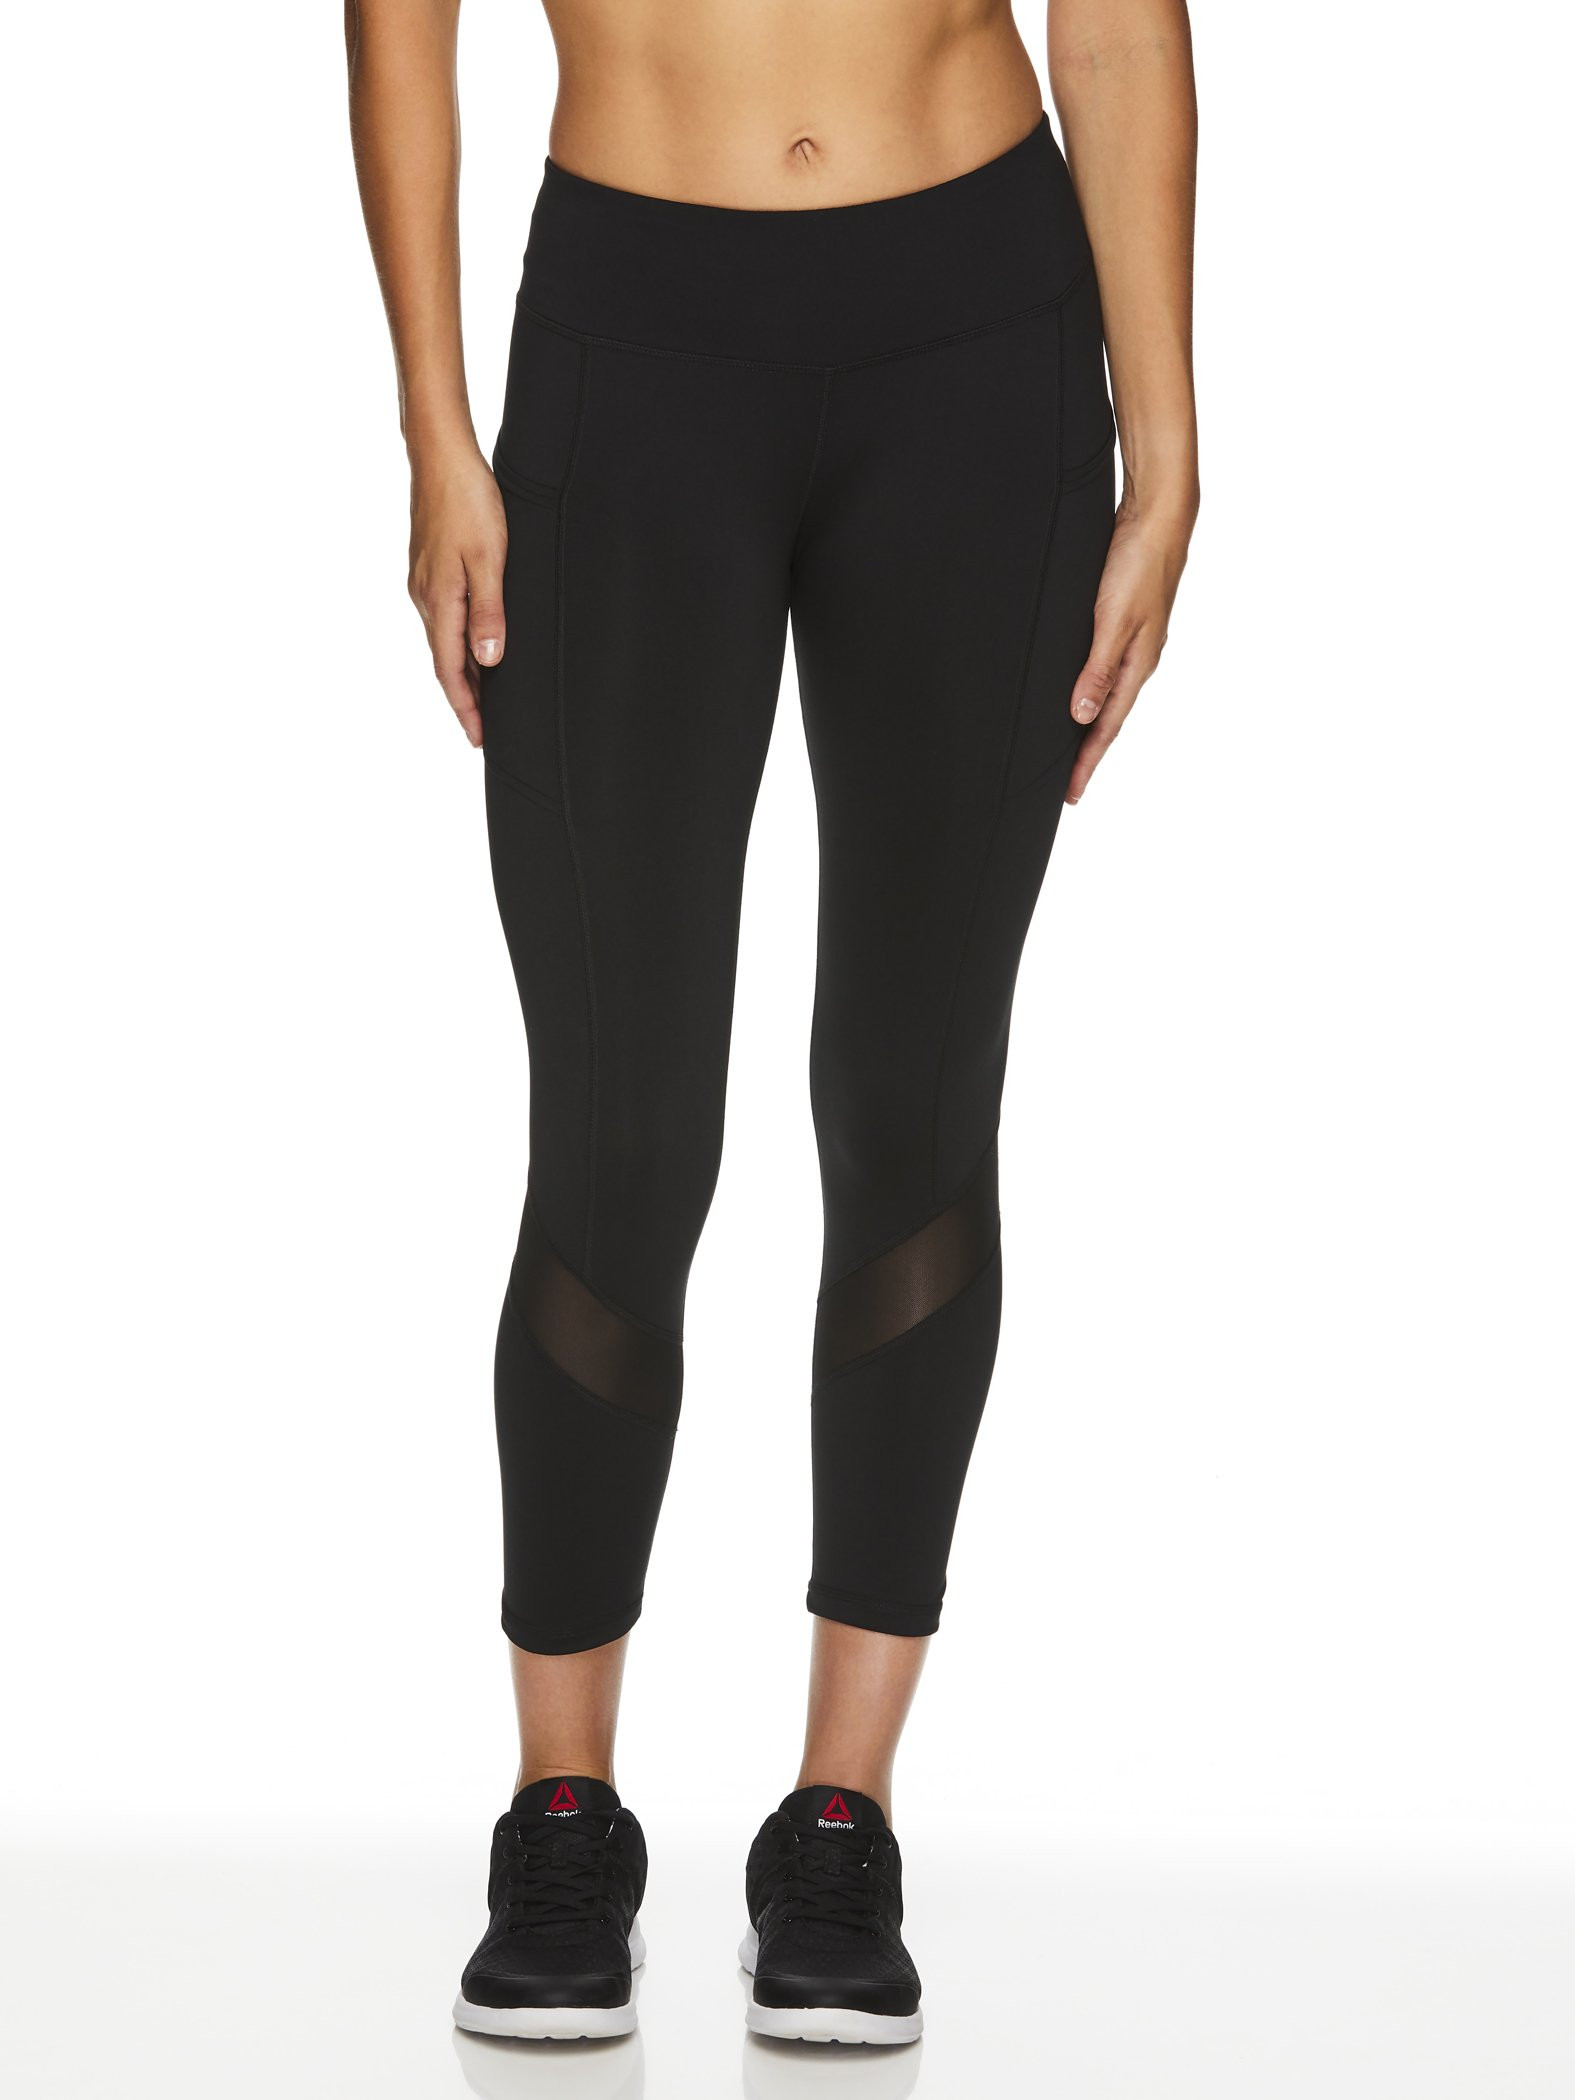 These athletic capris are the perfect fitted capri for when you want to add some fun and color to your athleisure wardrobe. Product Features VERSATILE: Reebok workout capris are perfect for yoga, running, and everything in between. Never miss a beat with #capri